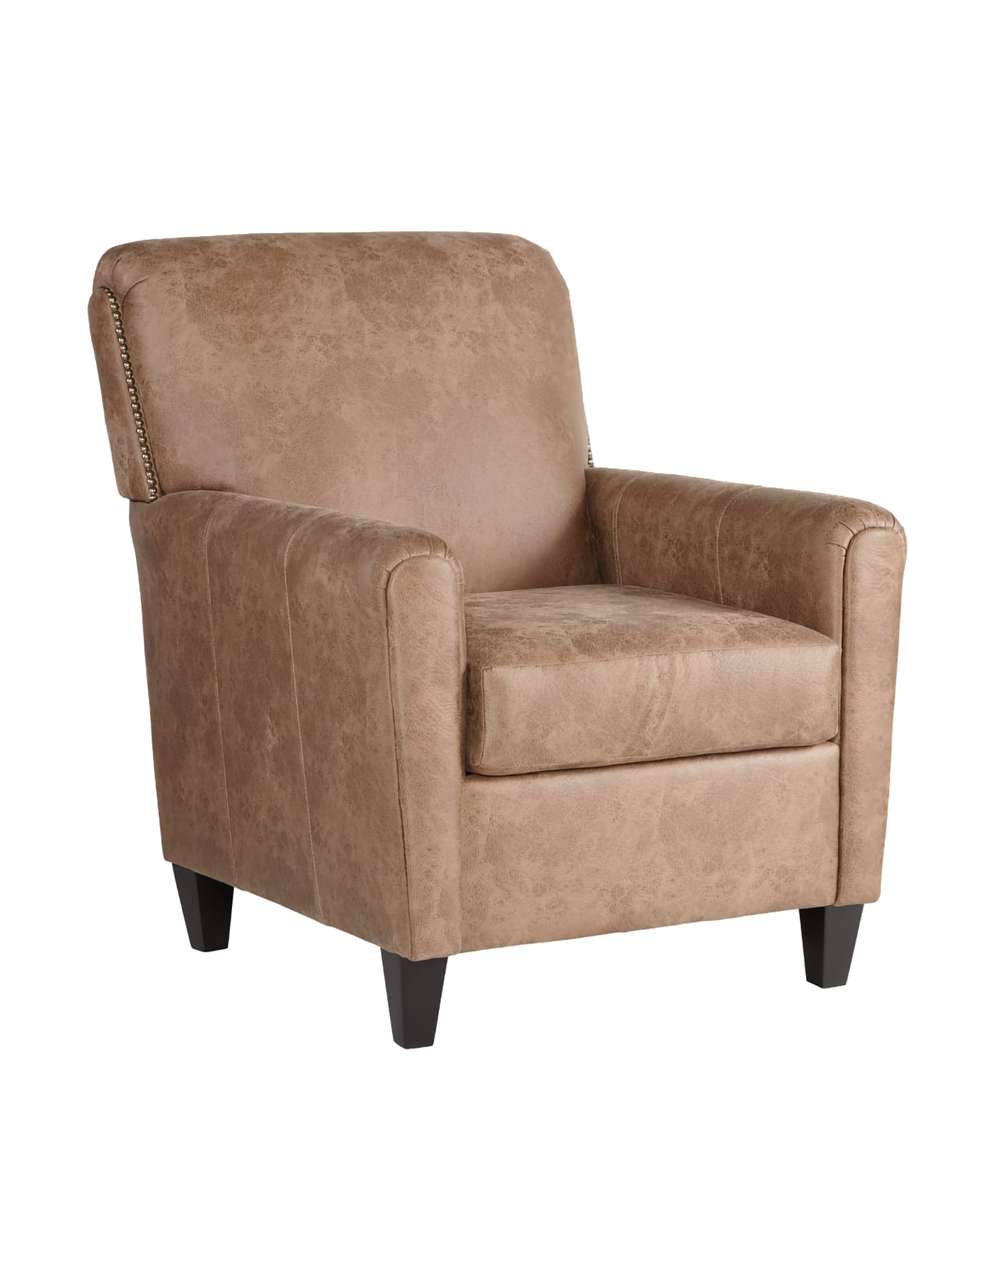 15C Jetson Ginger Accent Chair